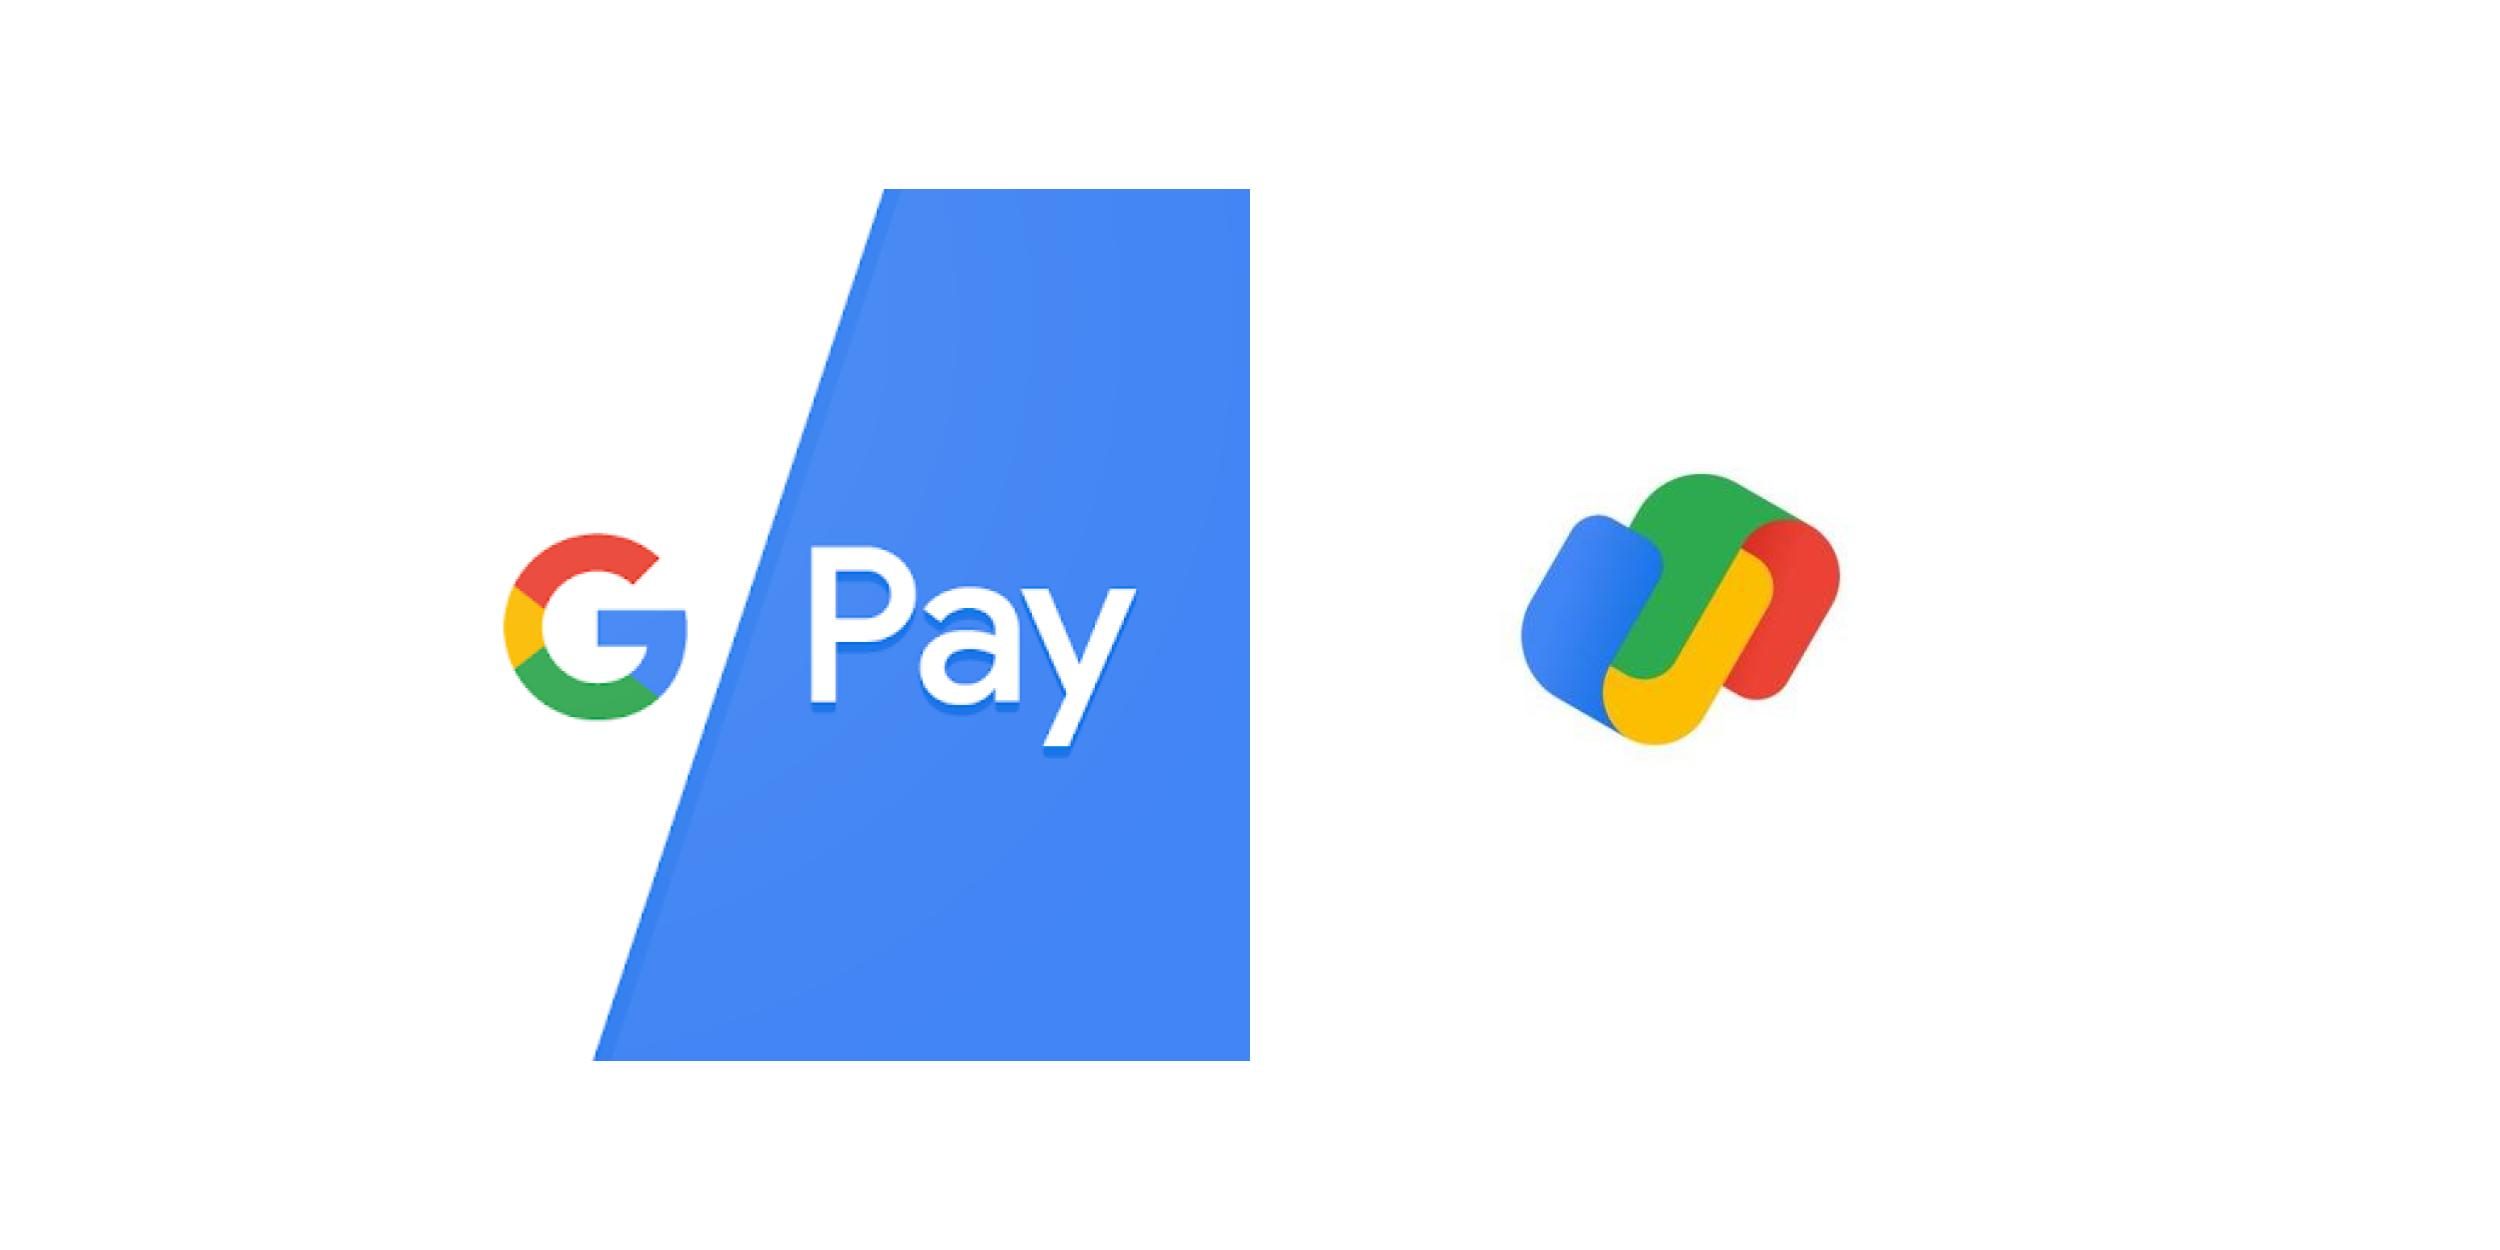 Mastercard And Google Pay Have Partnered Up To Make It Easier To Tokenize Card-Based Payments